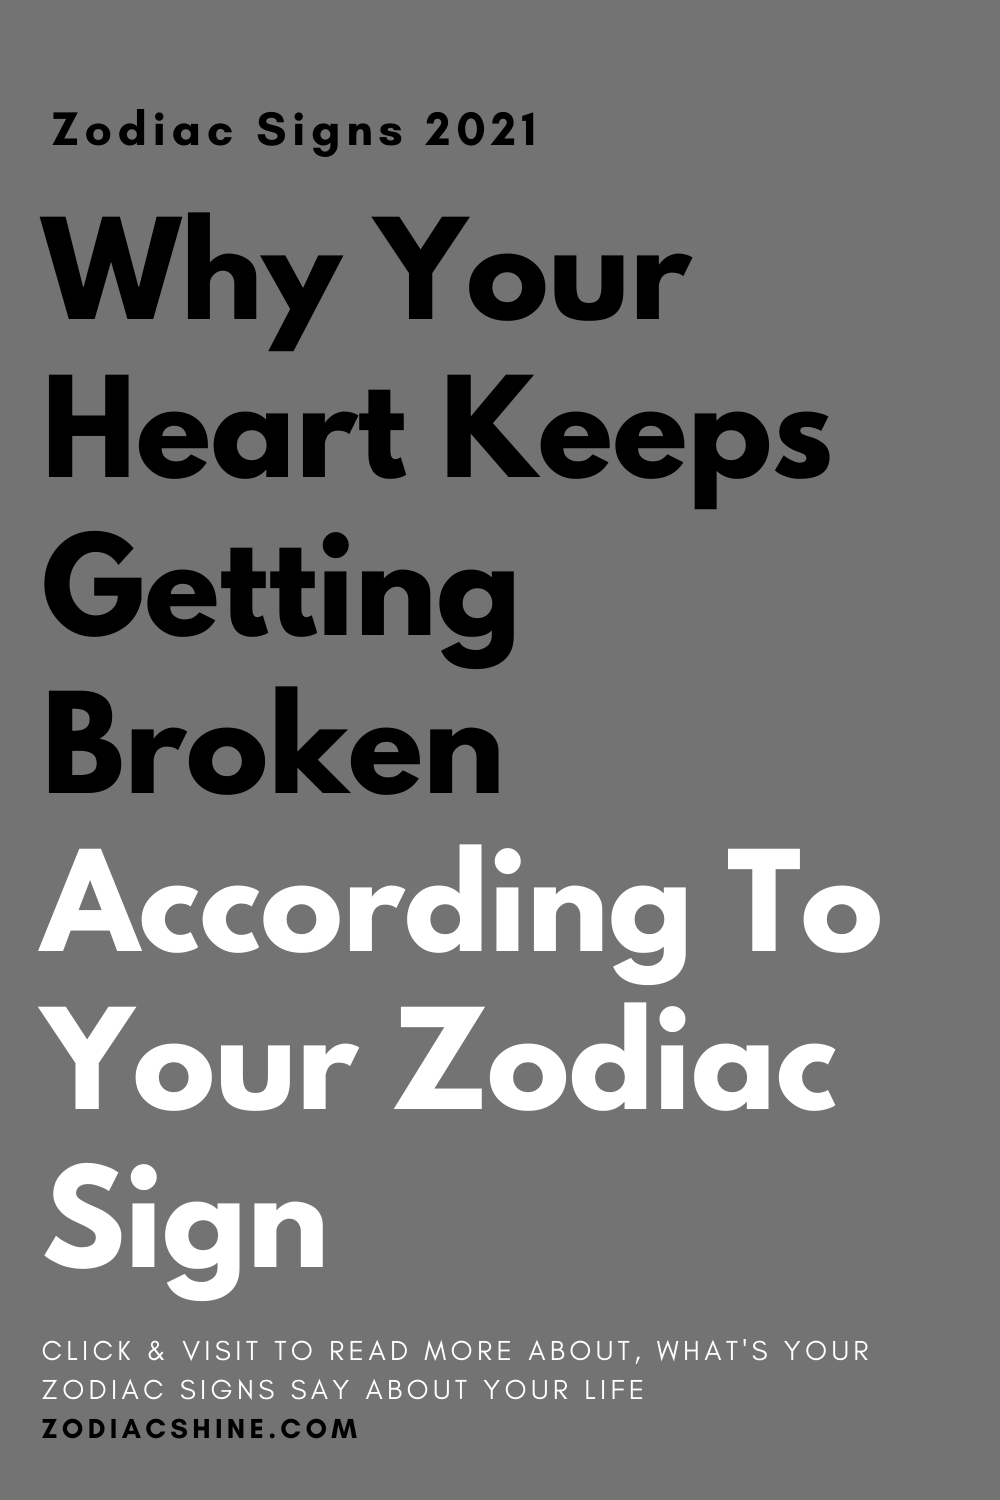 Why Your Heart Keeps Getting Broken According To Your Zodiac Sign